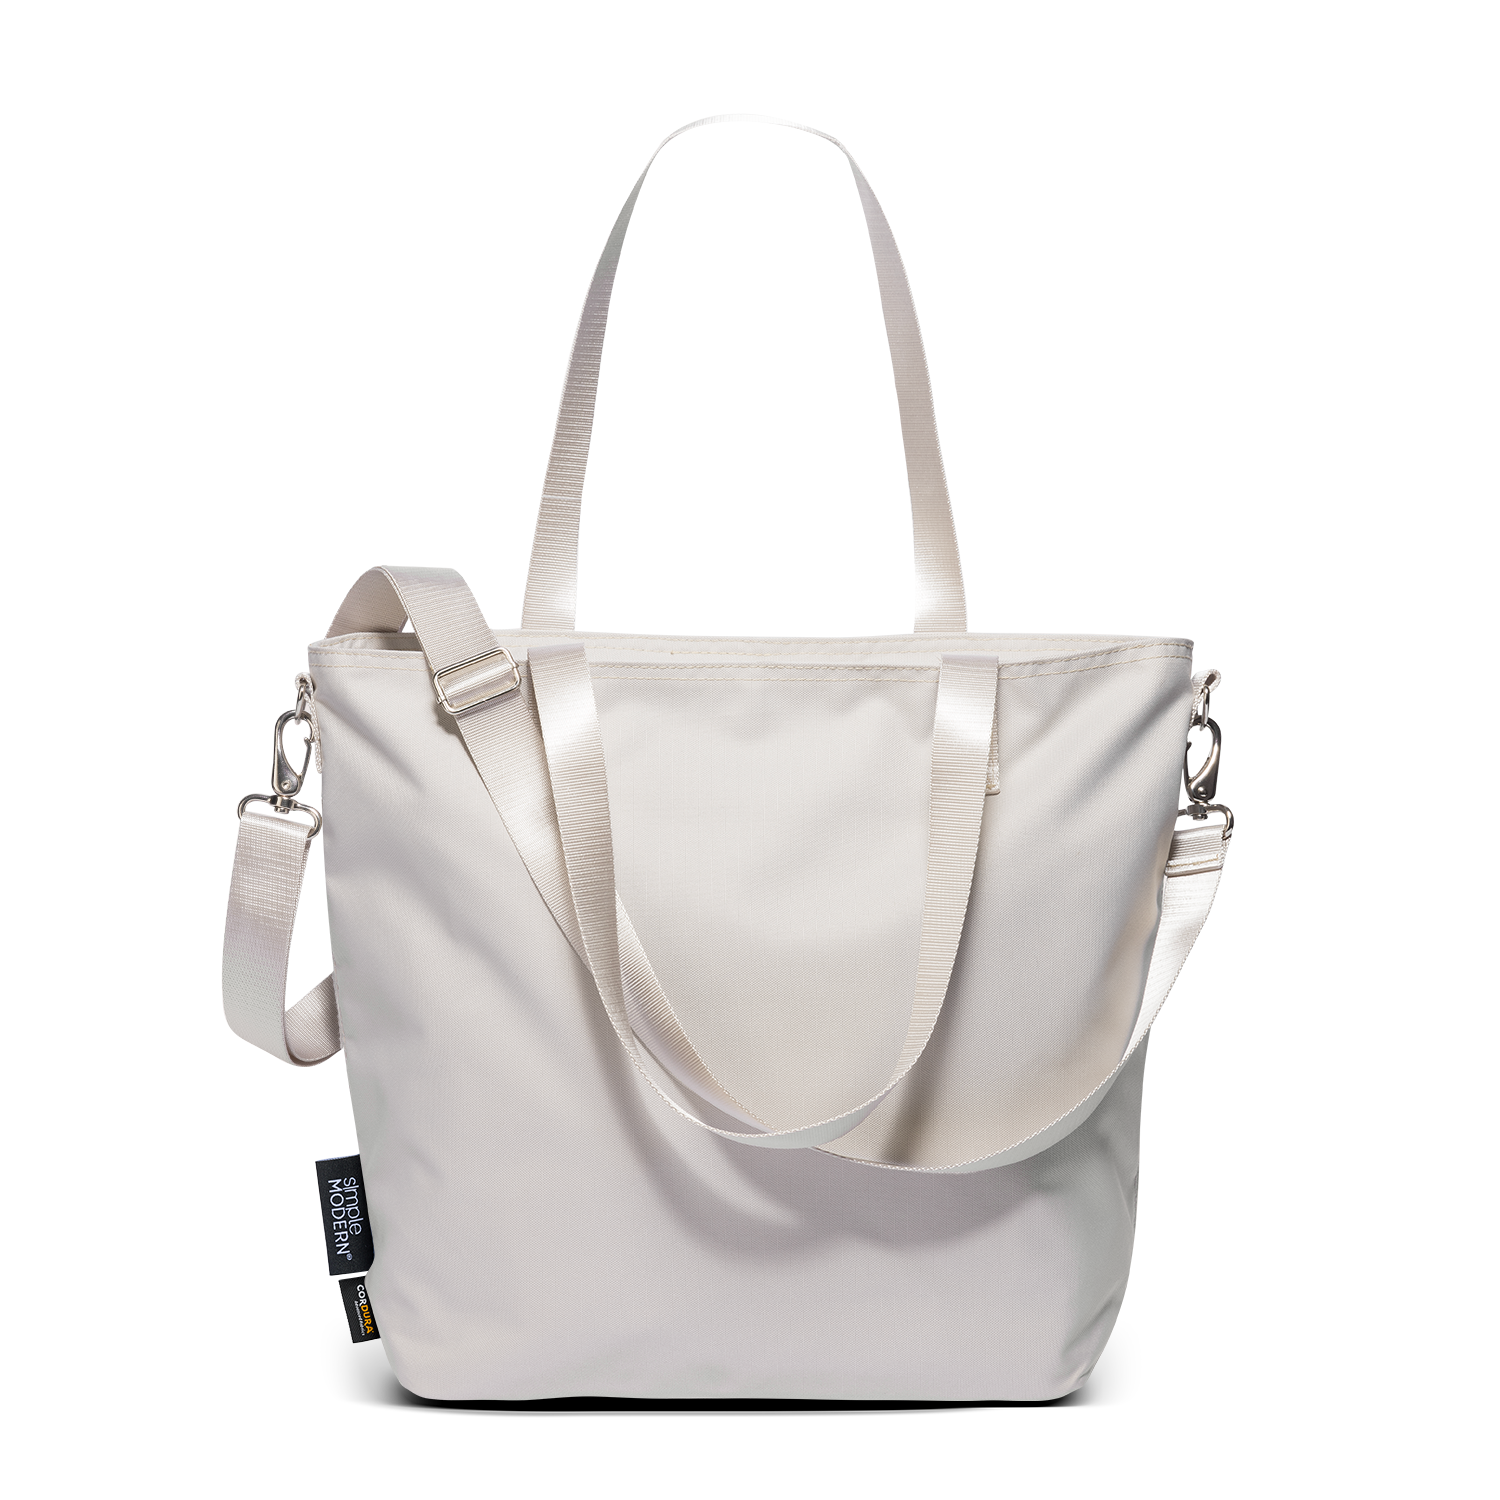 Simple Modern Tote Bag for Women | Work Laptop Tote Bags | Shoulder Bag with Crossbody Strap and Pockets Water-Resistant | 22 Almond Birch